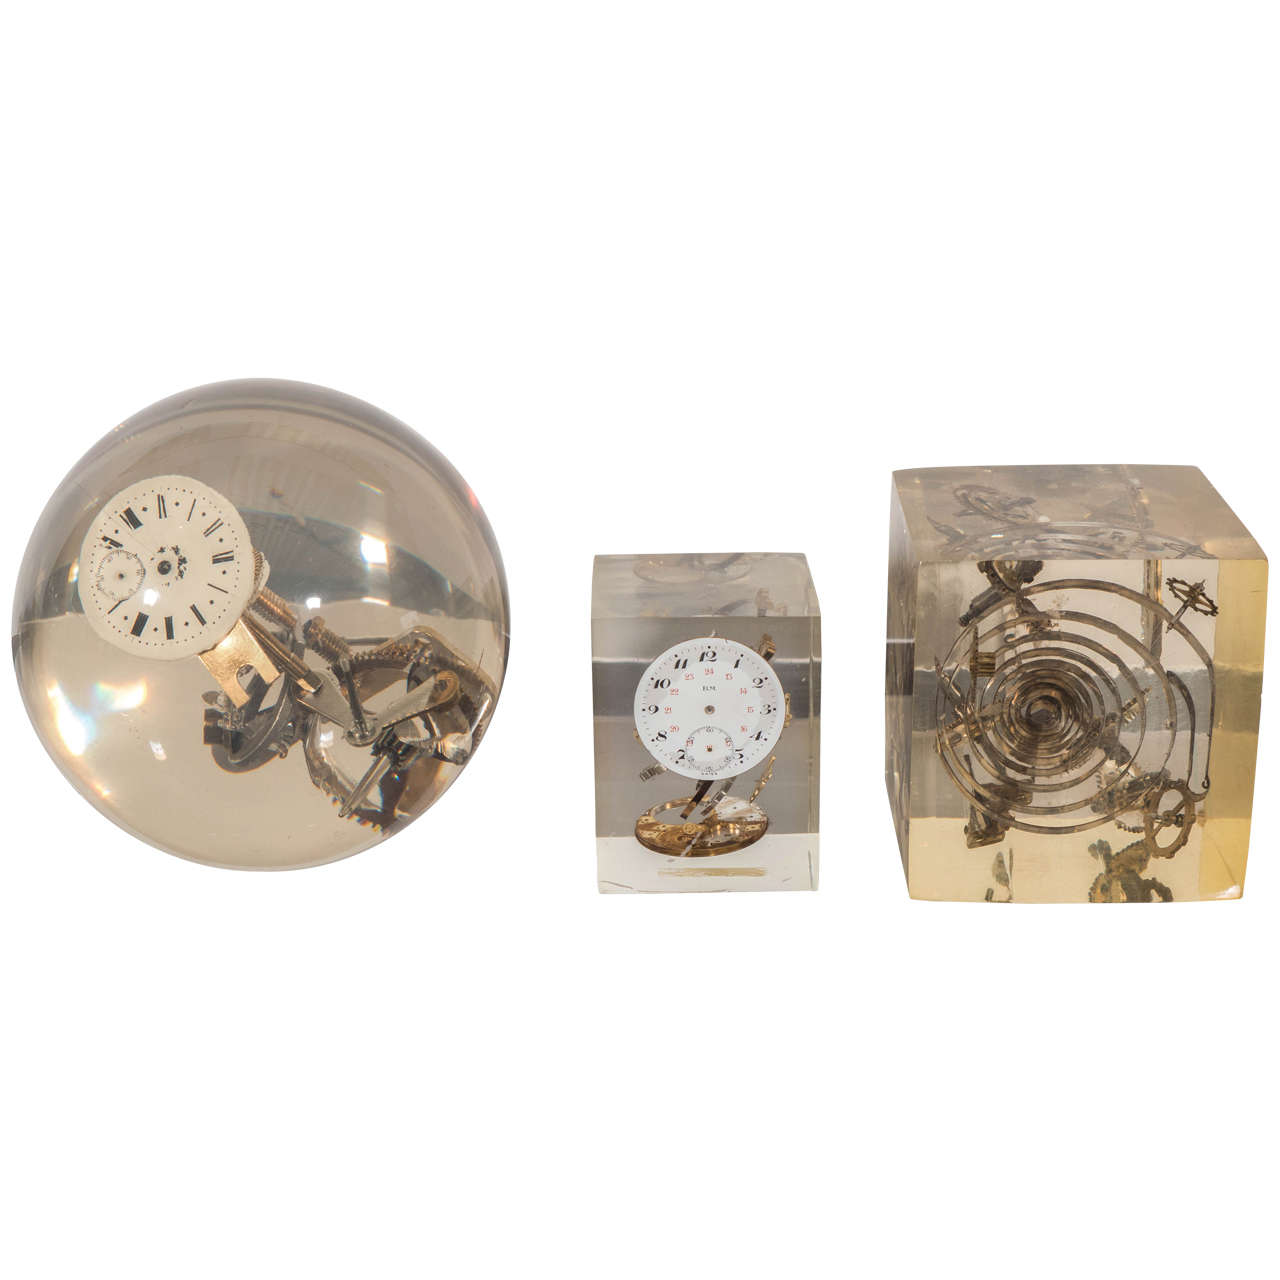 Set of Three Objects with Clock Parts by Pierre Giraudon, France circa 1960